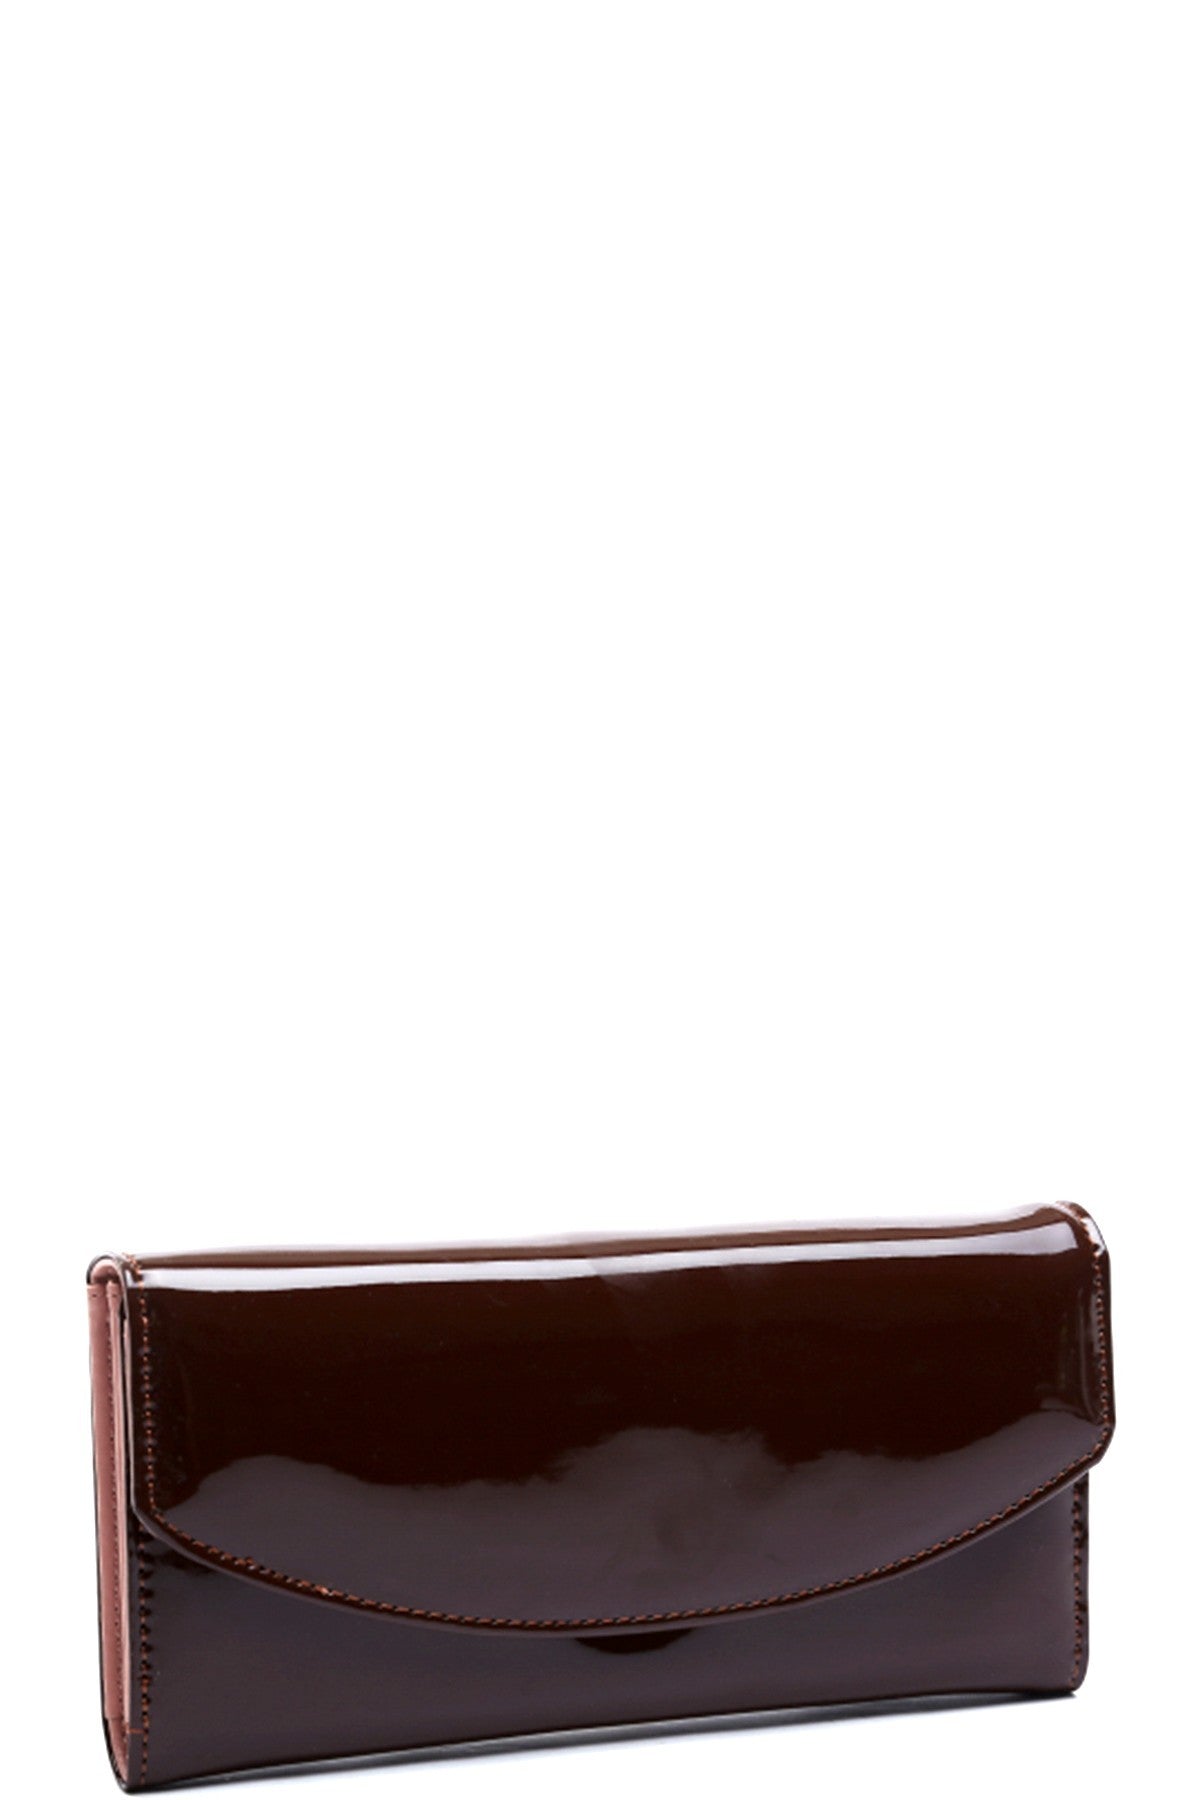 Glossy Color Statement Clutch